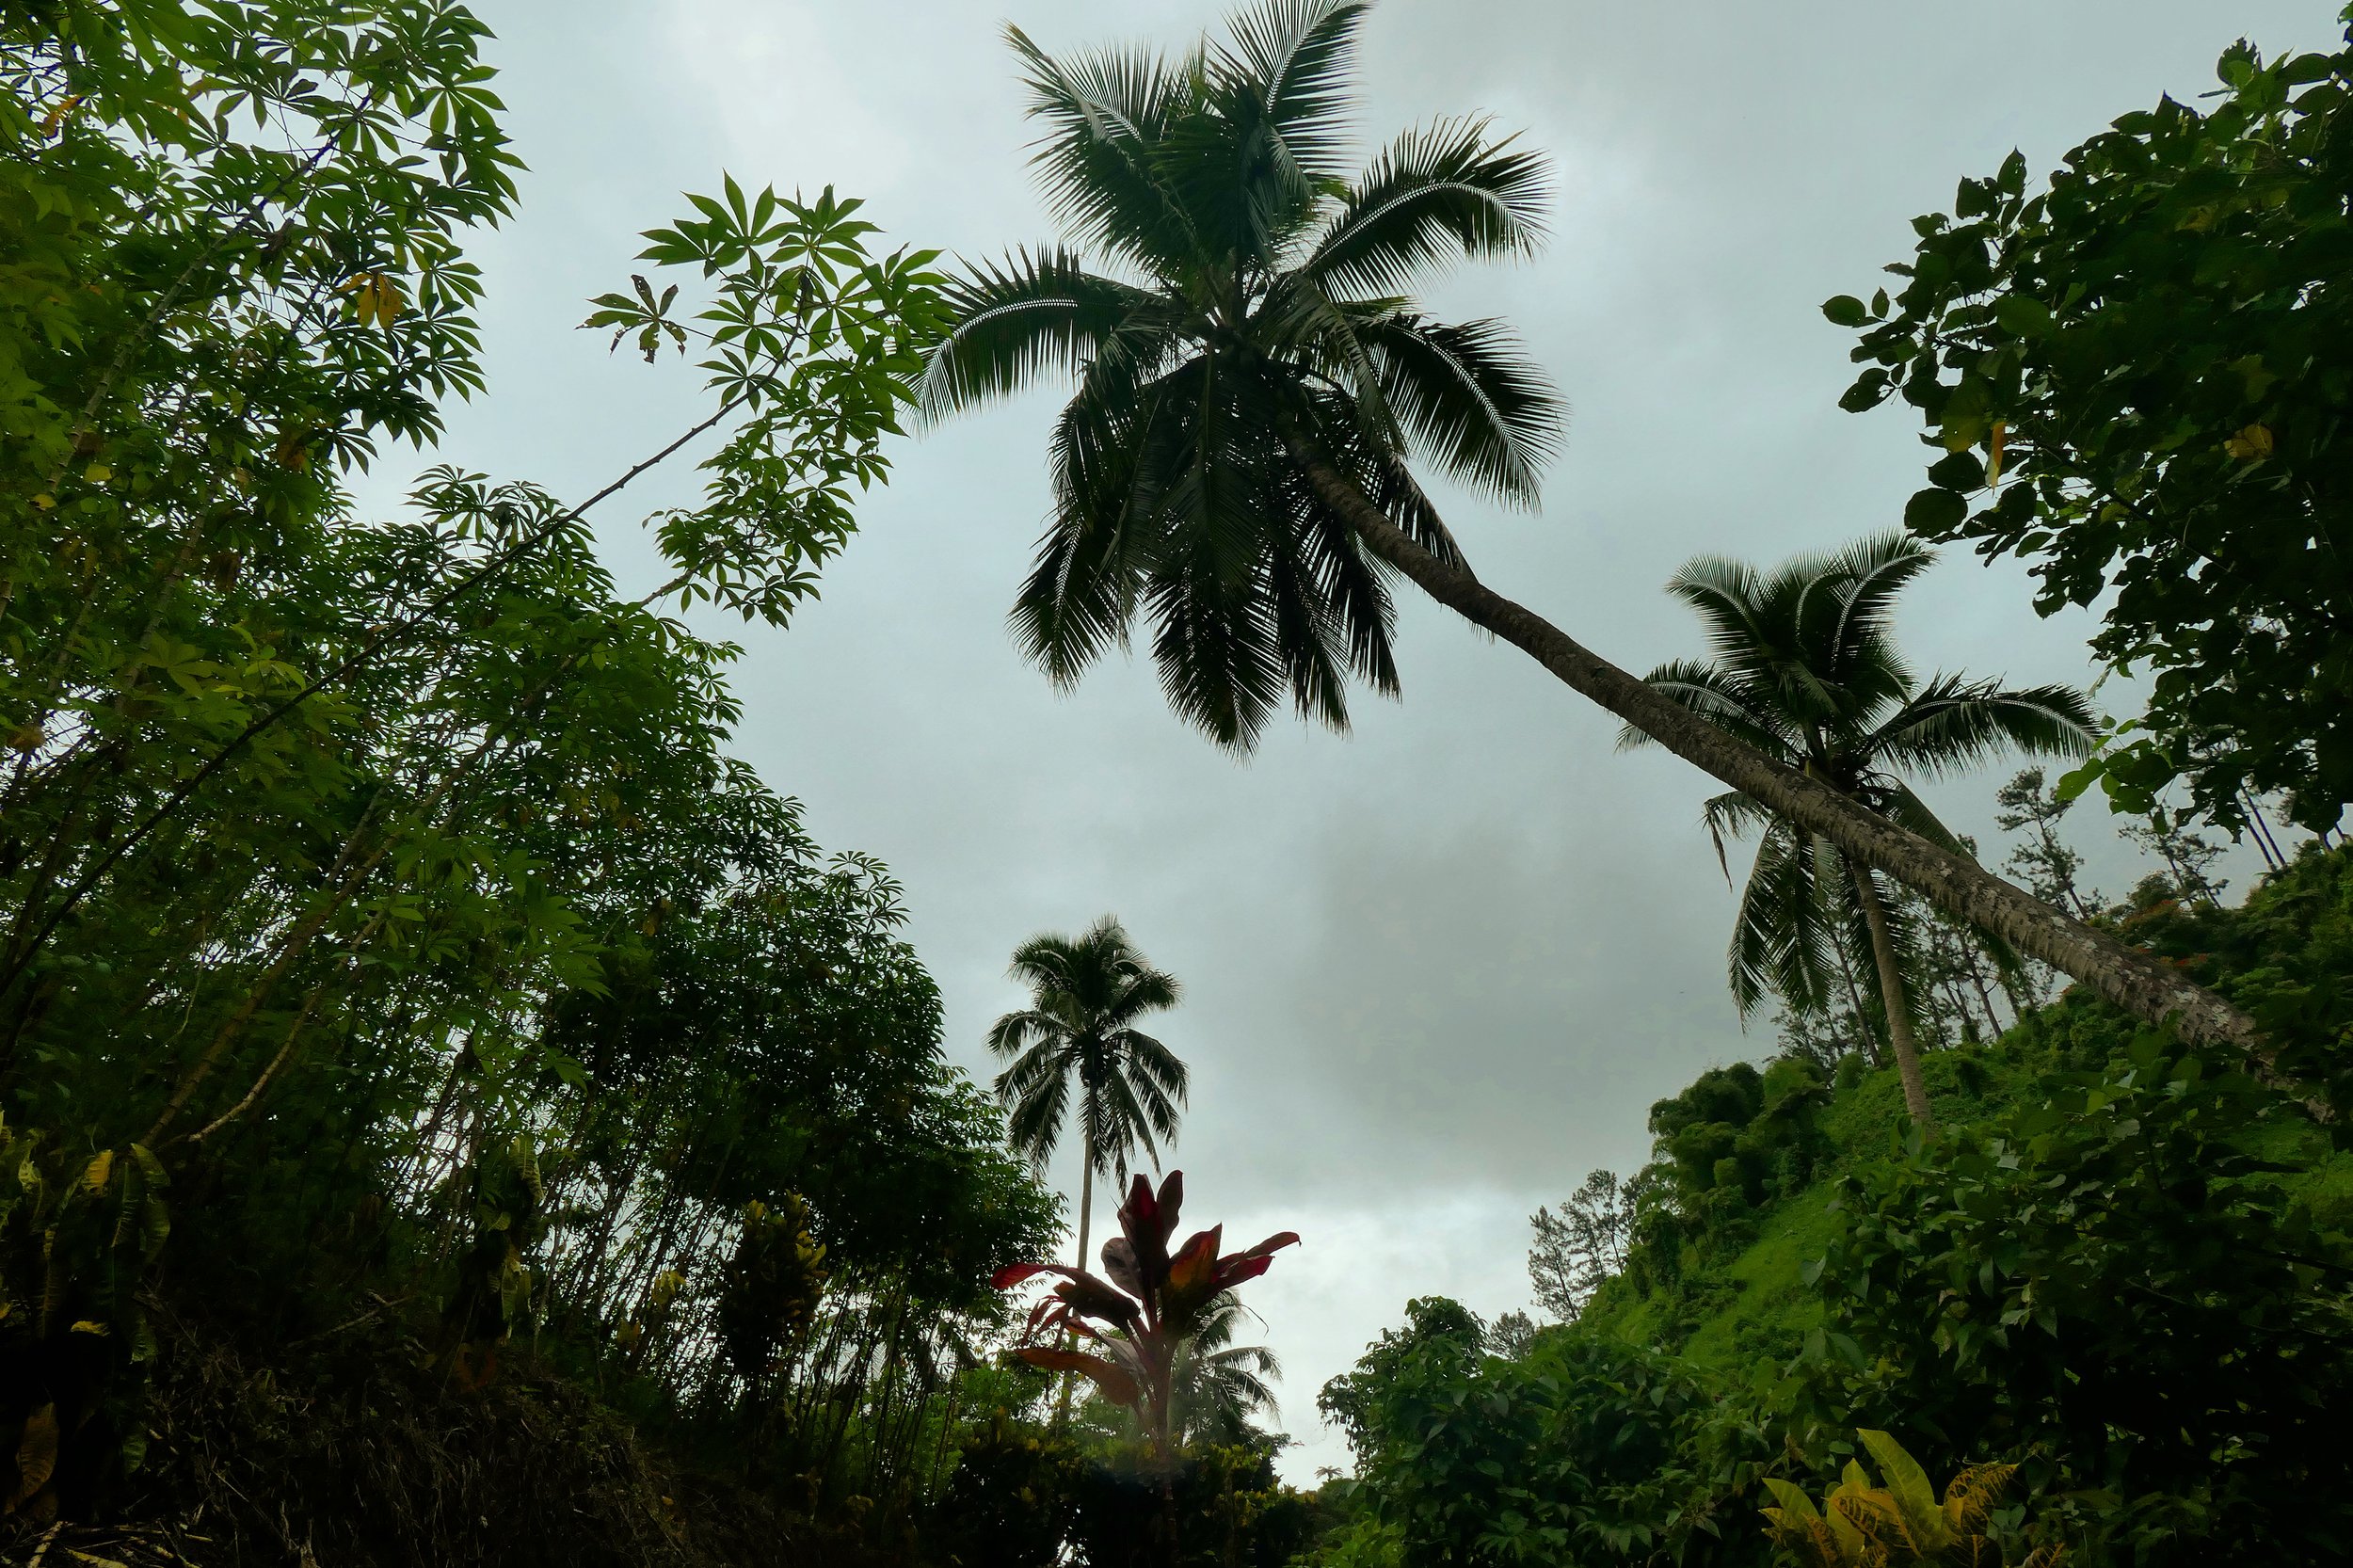 Copy of Stormy weather during monsoon season in Fiji passes quickly, though Savusavu on the eastern side of the island chain is known to be rainier.JPG